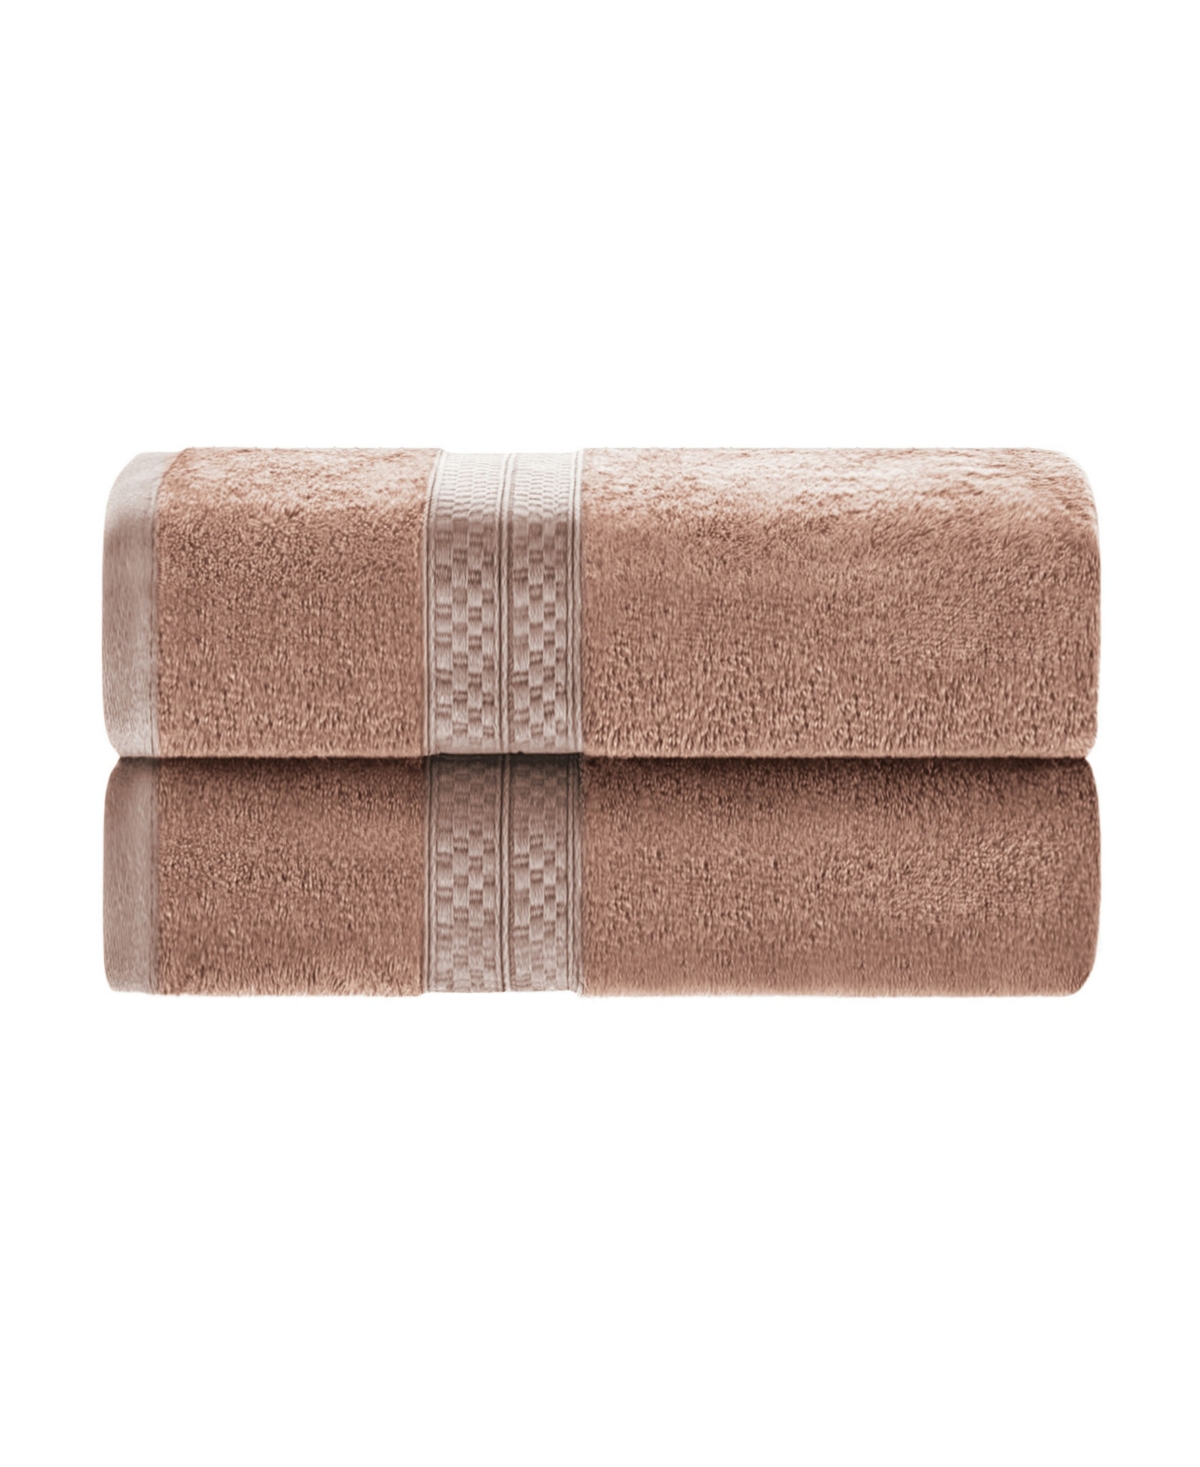 Superior Rayon From Bamboo Blend Ultra Soft Quick Drying Solid 2 Piece Bath Towel Set, 54" L X 30" W In Sand